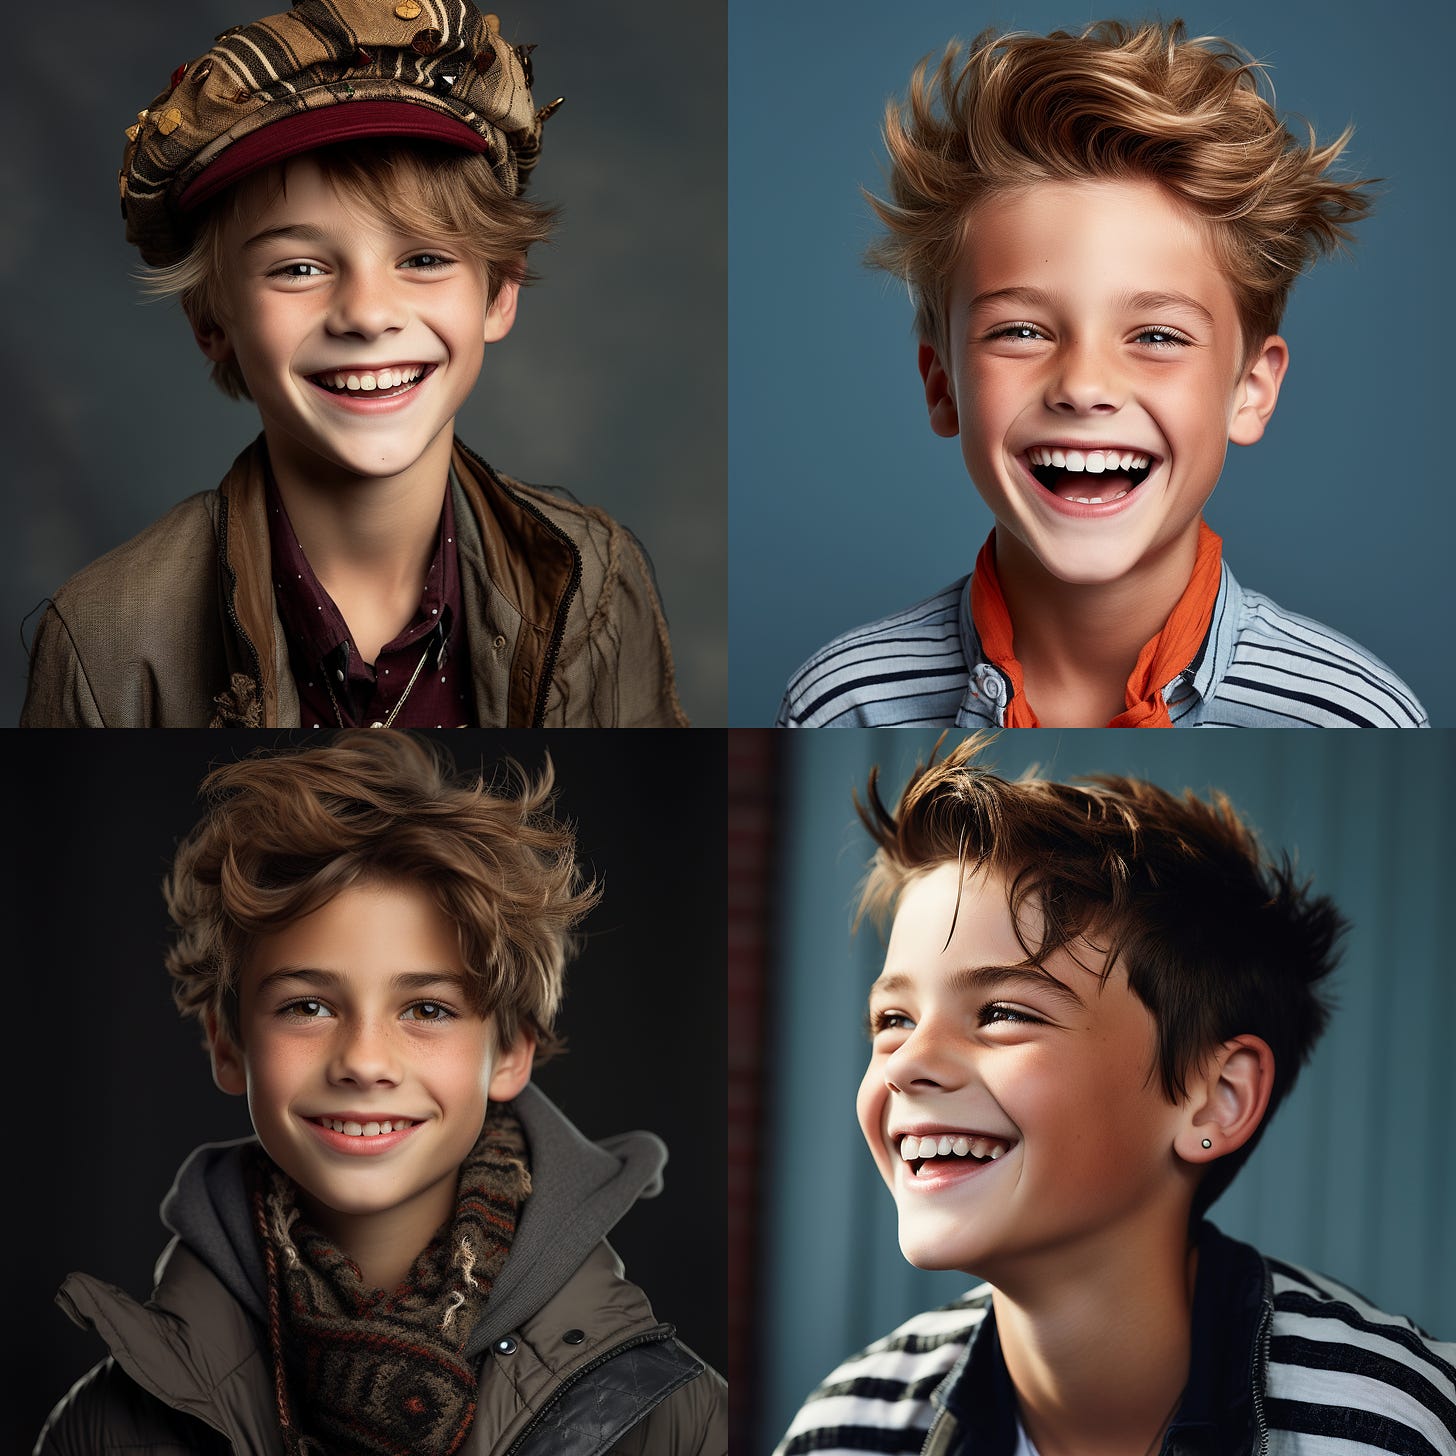 Four-image grid of smiling boy portraits, one is wearing a hat